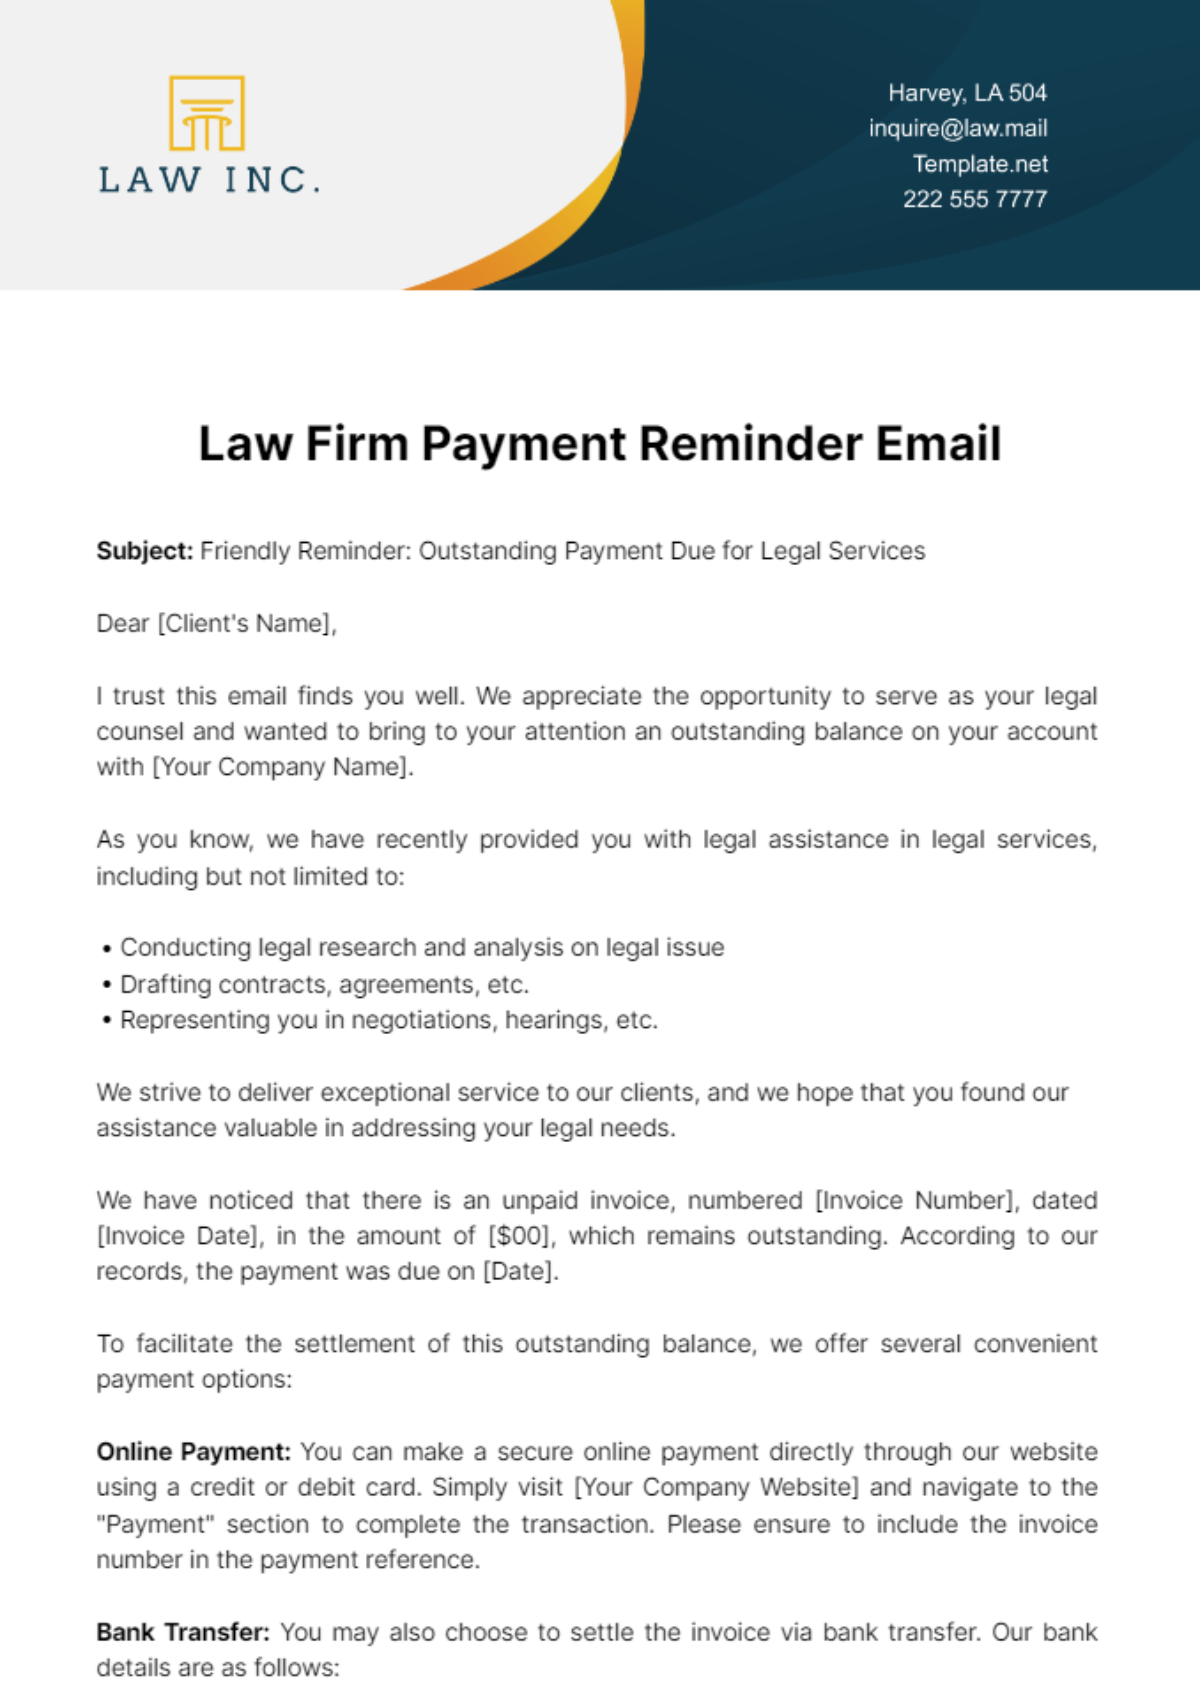 Law Firm Payment Reminder Email Template